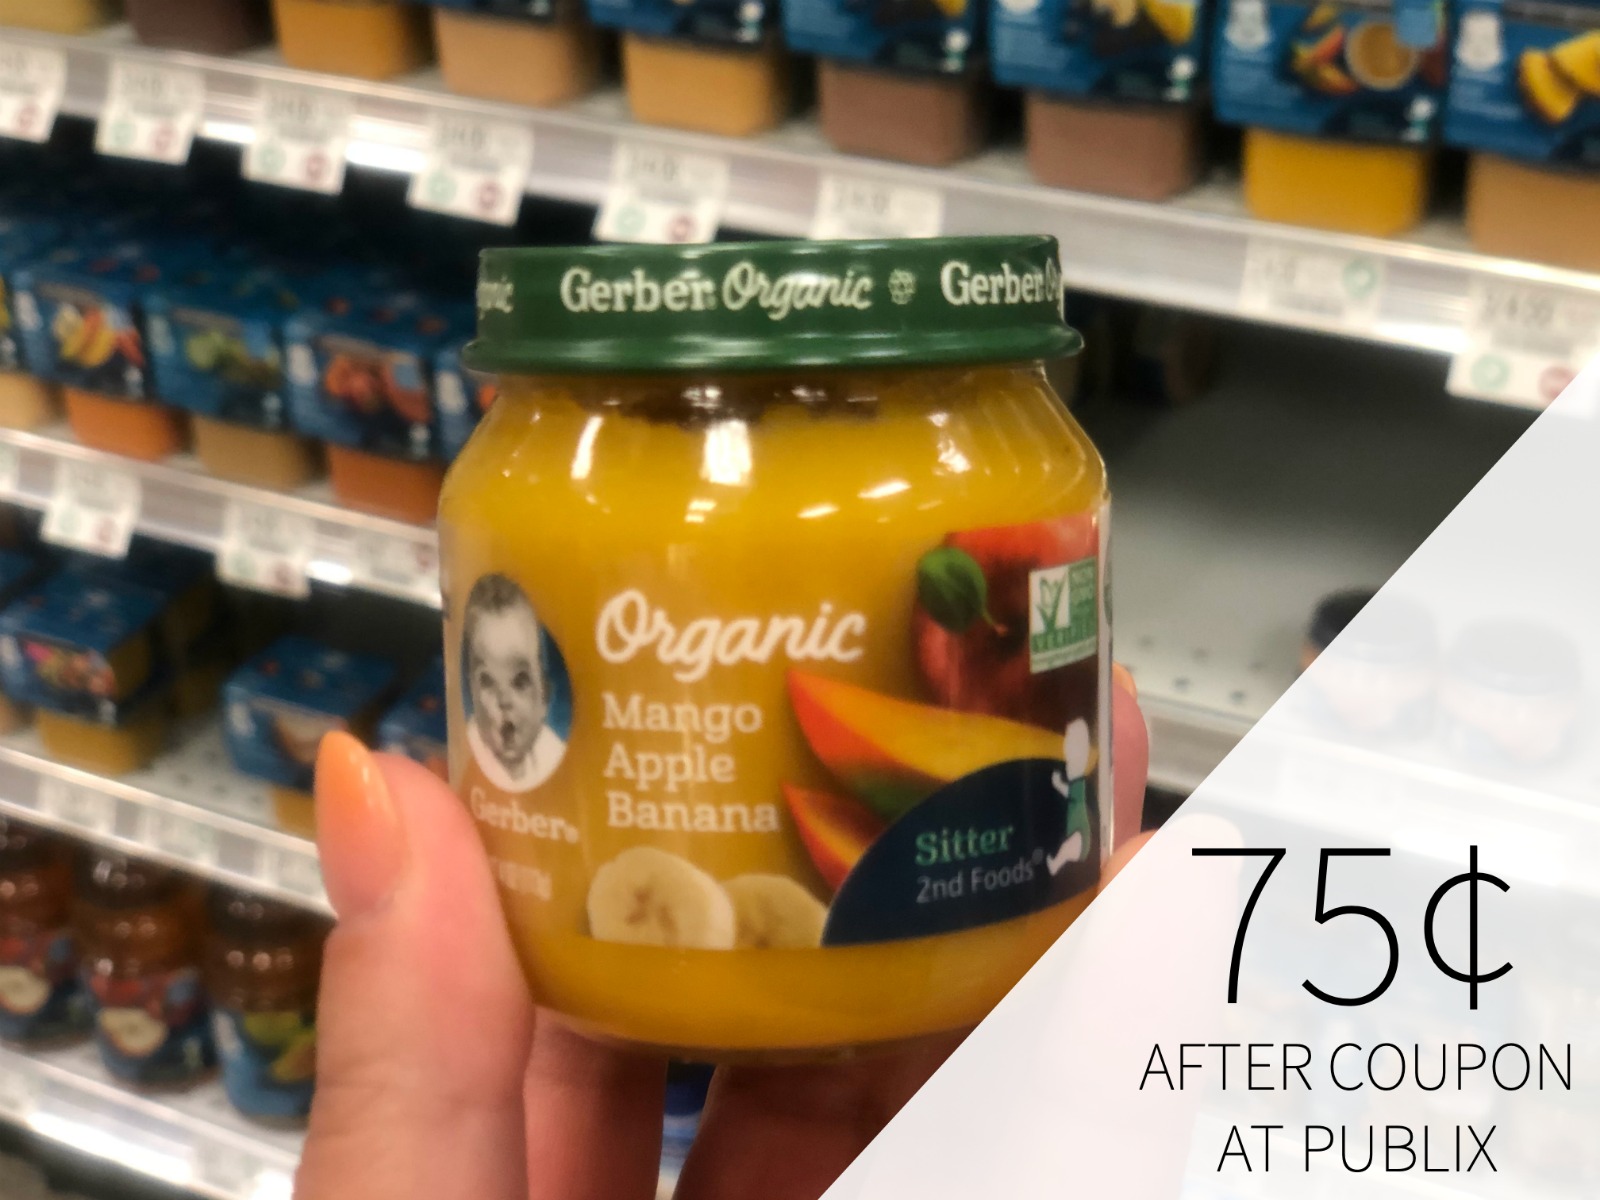 Gerber Baby Food Jars Or Pouches Just 88¢ Each At Publix on I Heart Publix 2